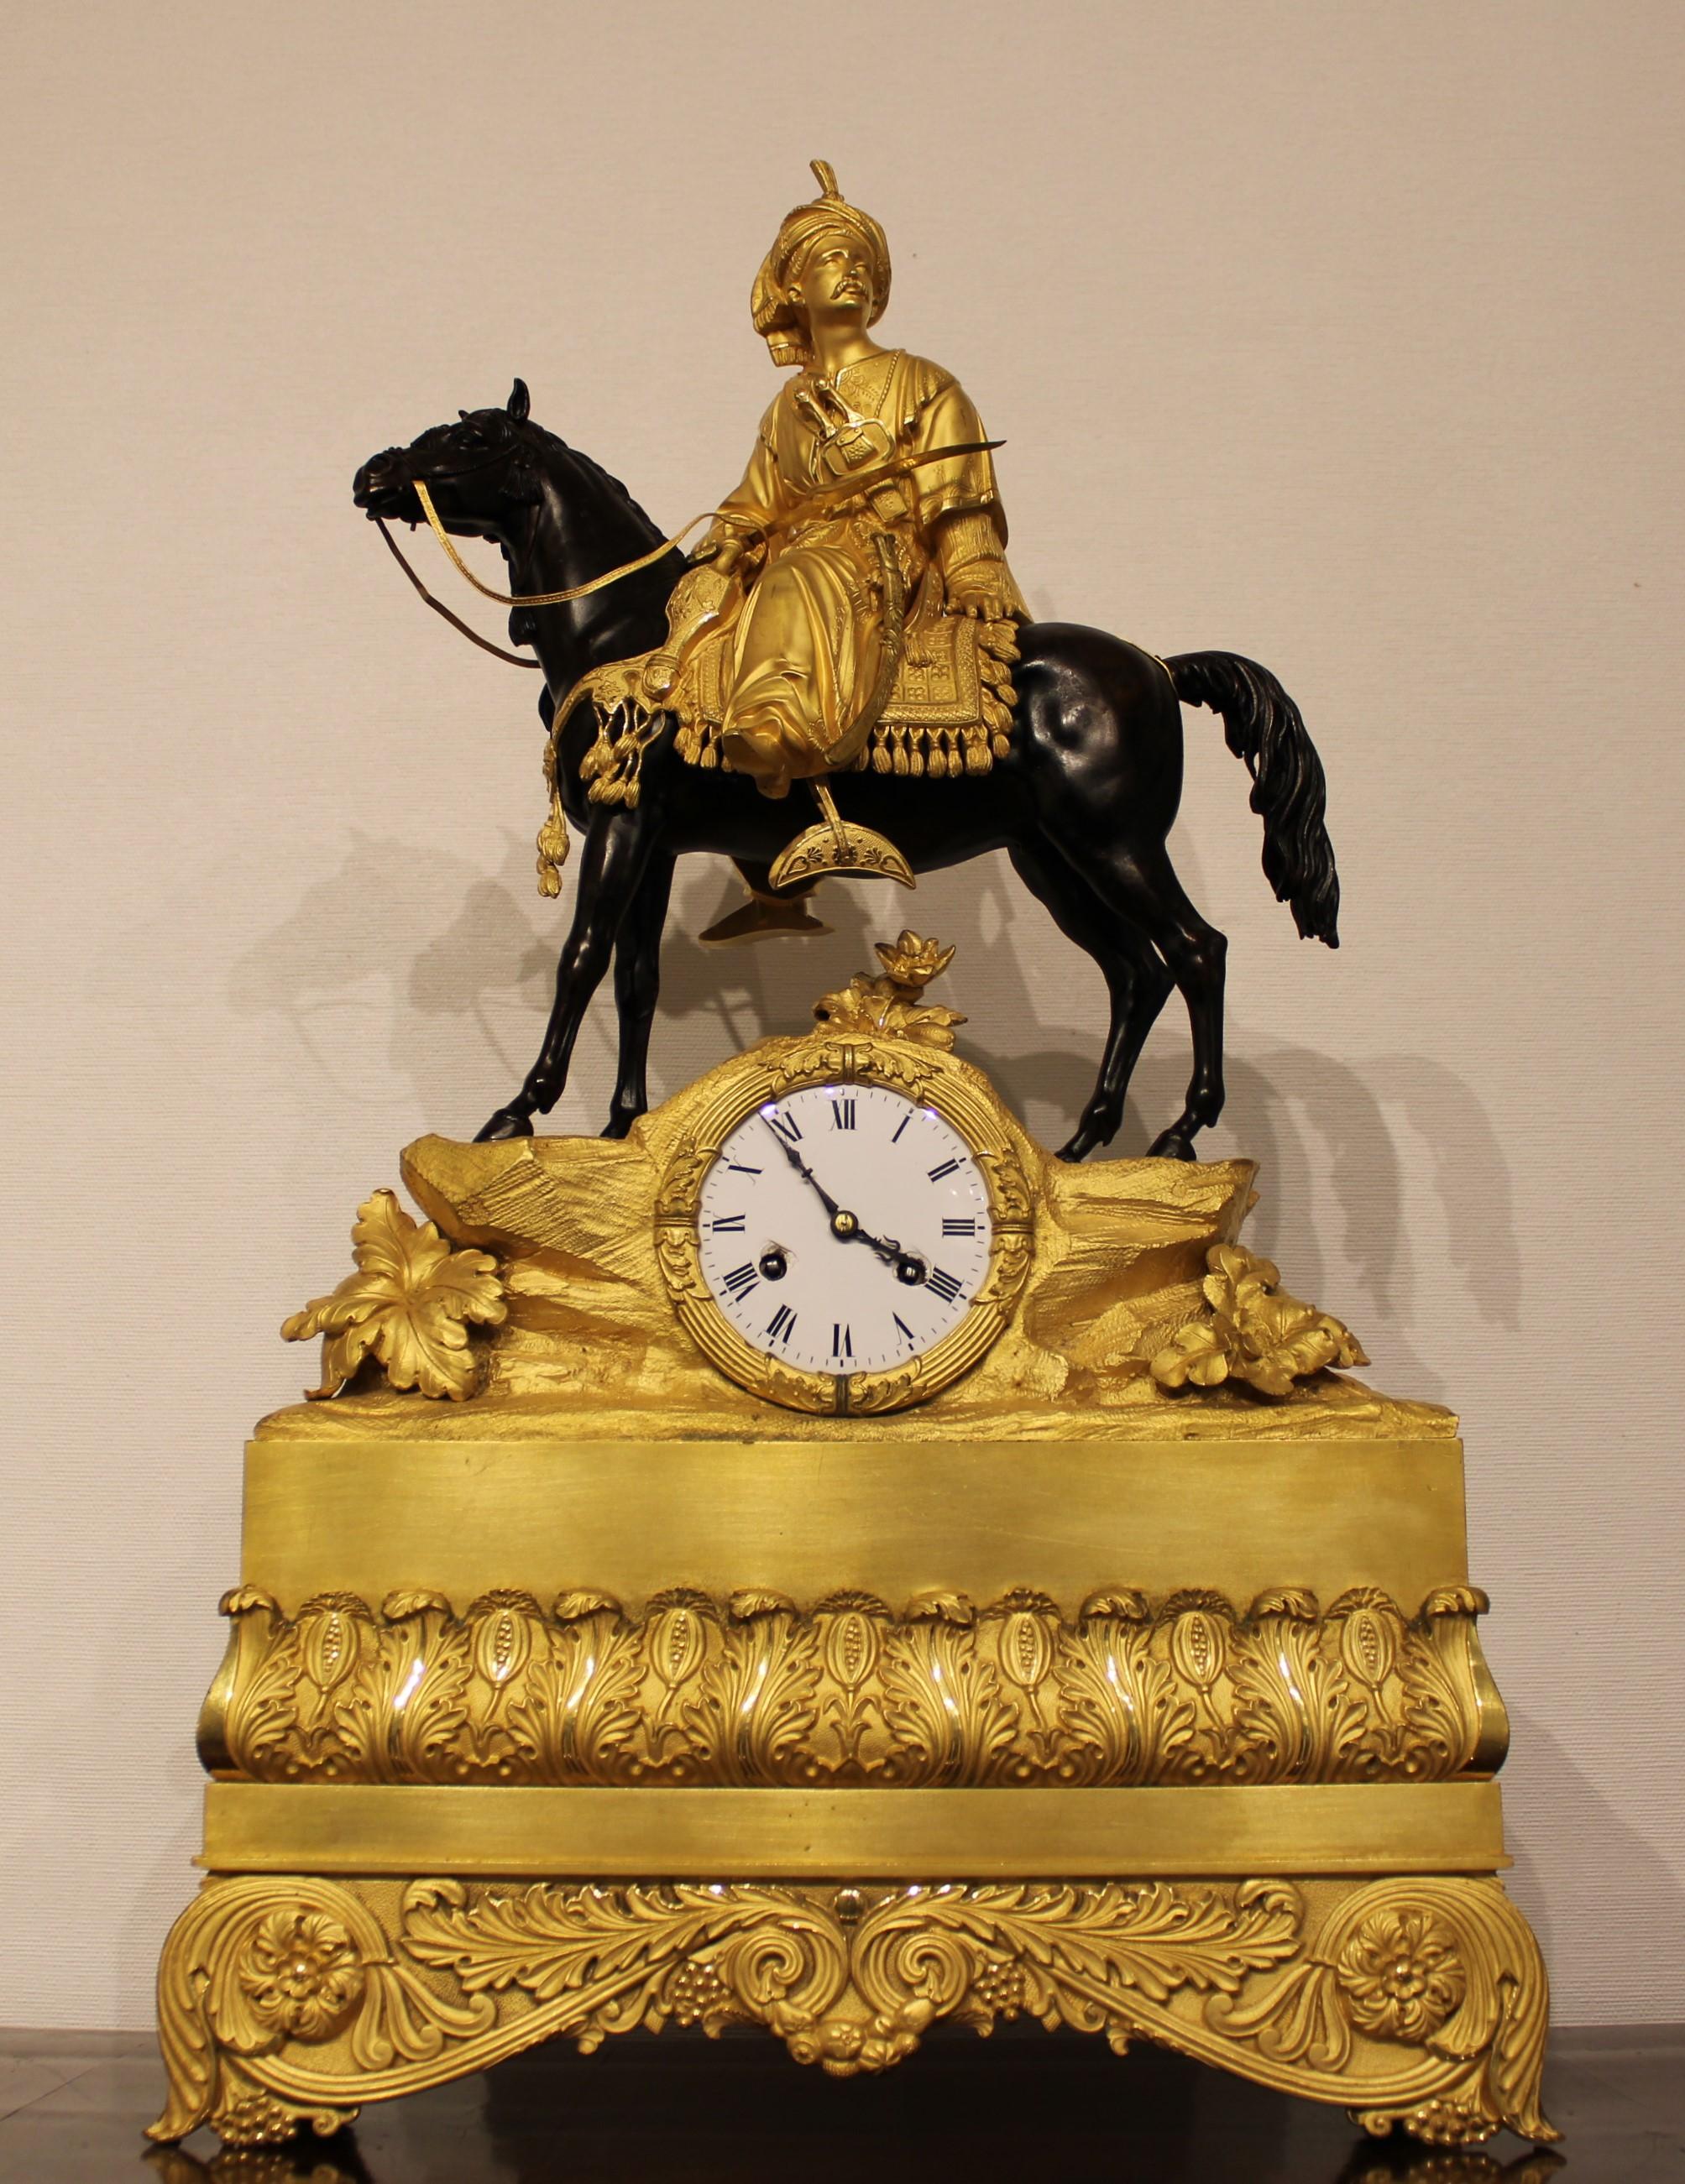 Orientalist table clock from the early 19th century
Gilted bronze
France